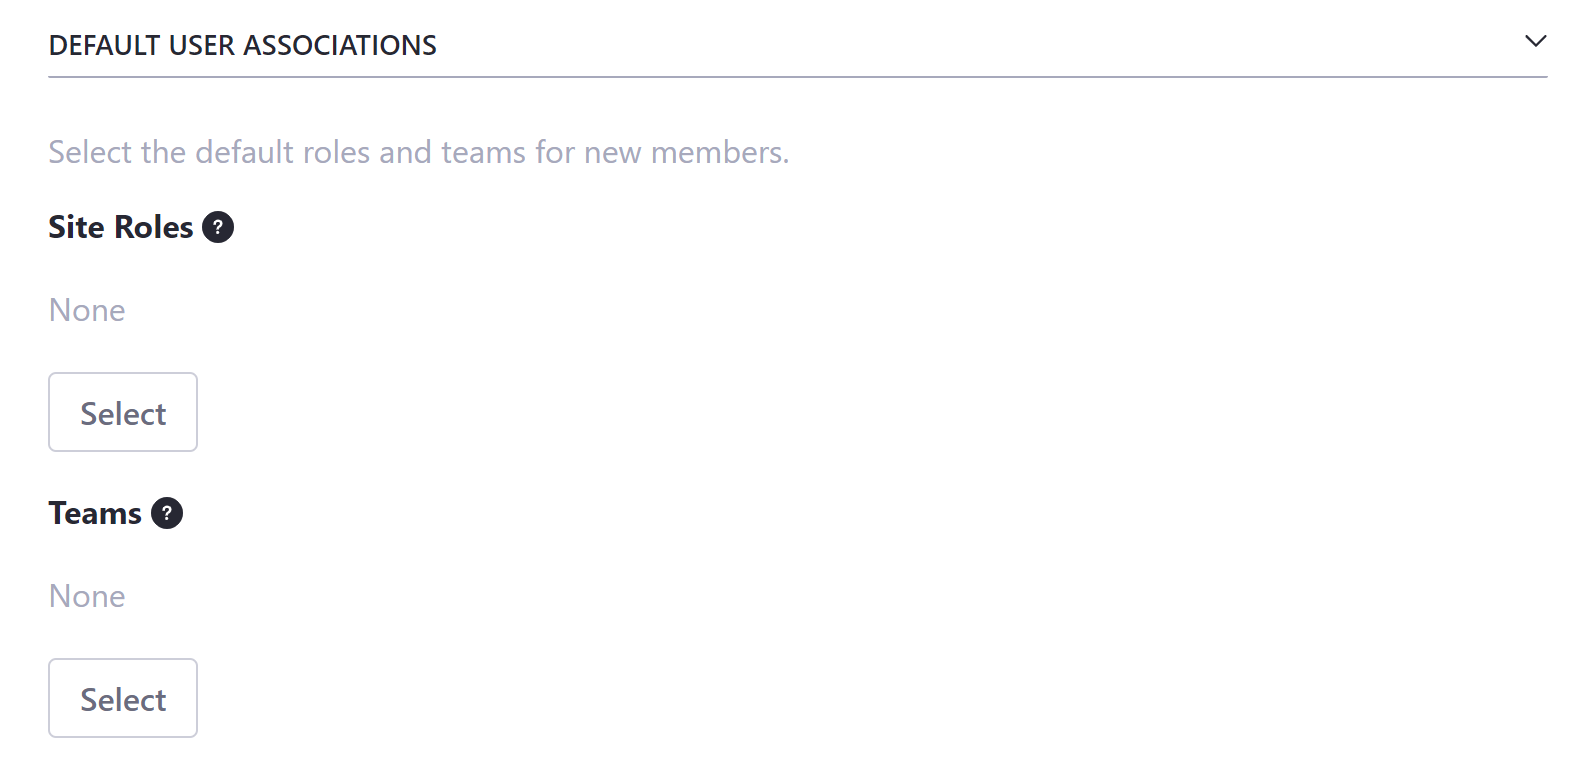 You can select the Roles and Teams that new Site members are assigned to by default.